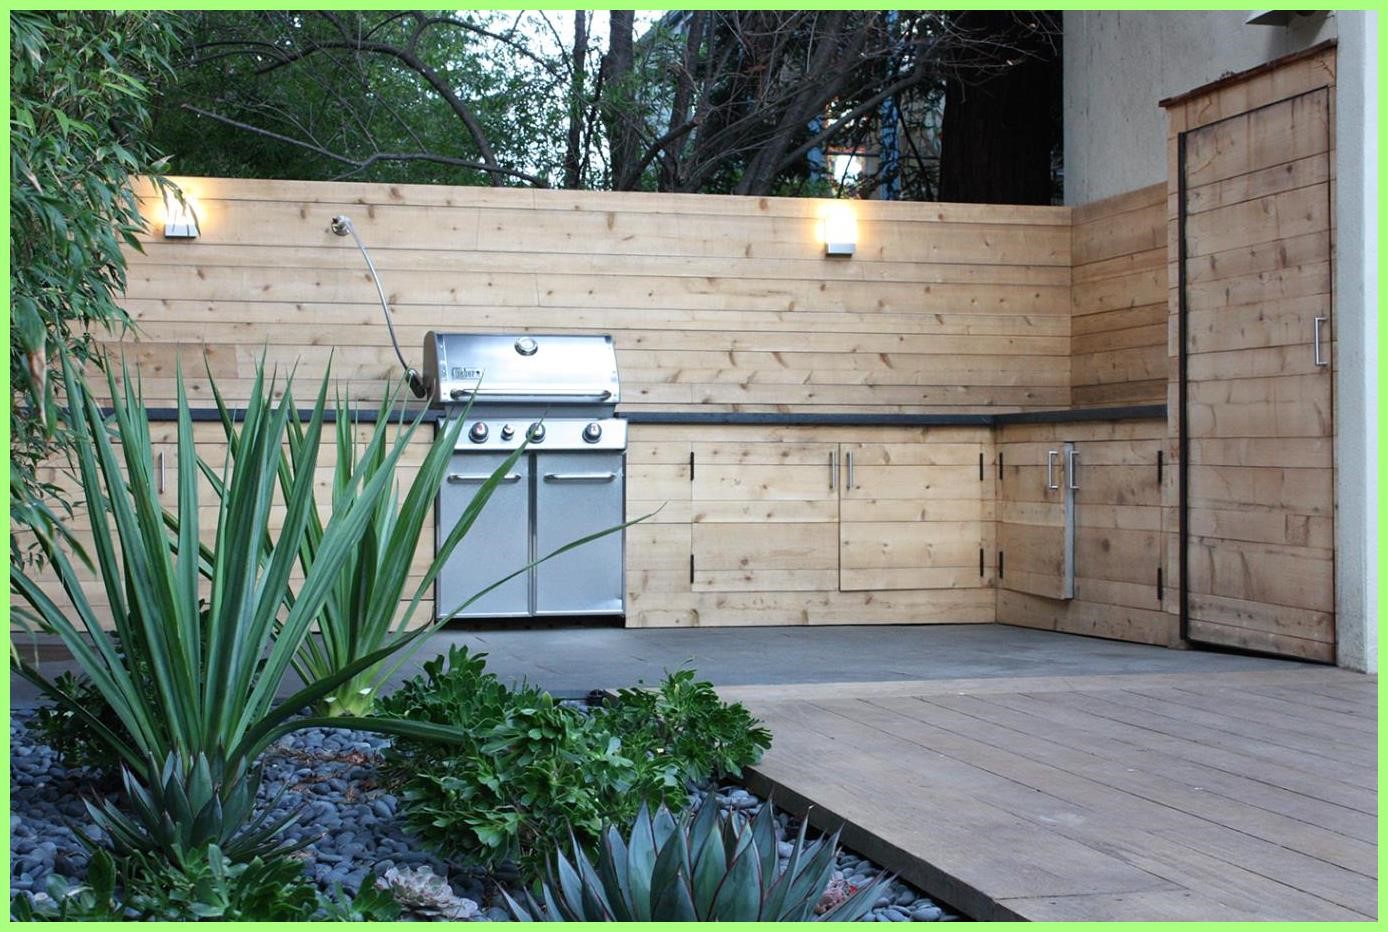 16 Outdoor Kitchen Components Steal This Look An Outdoor Kitchen Hidden from the Tourists on  Outdoor,Kitchen,Components